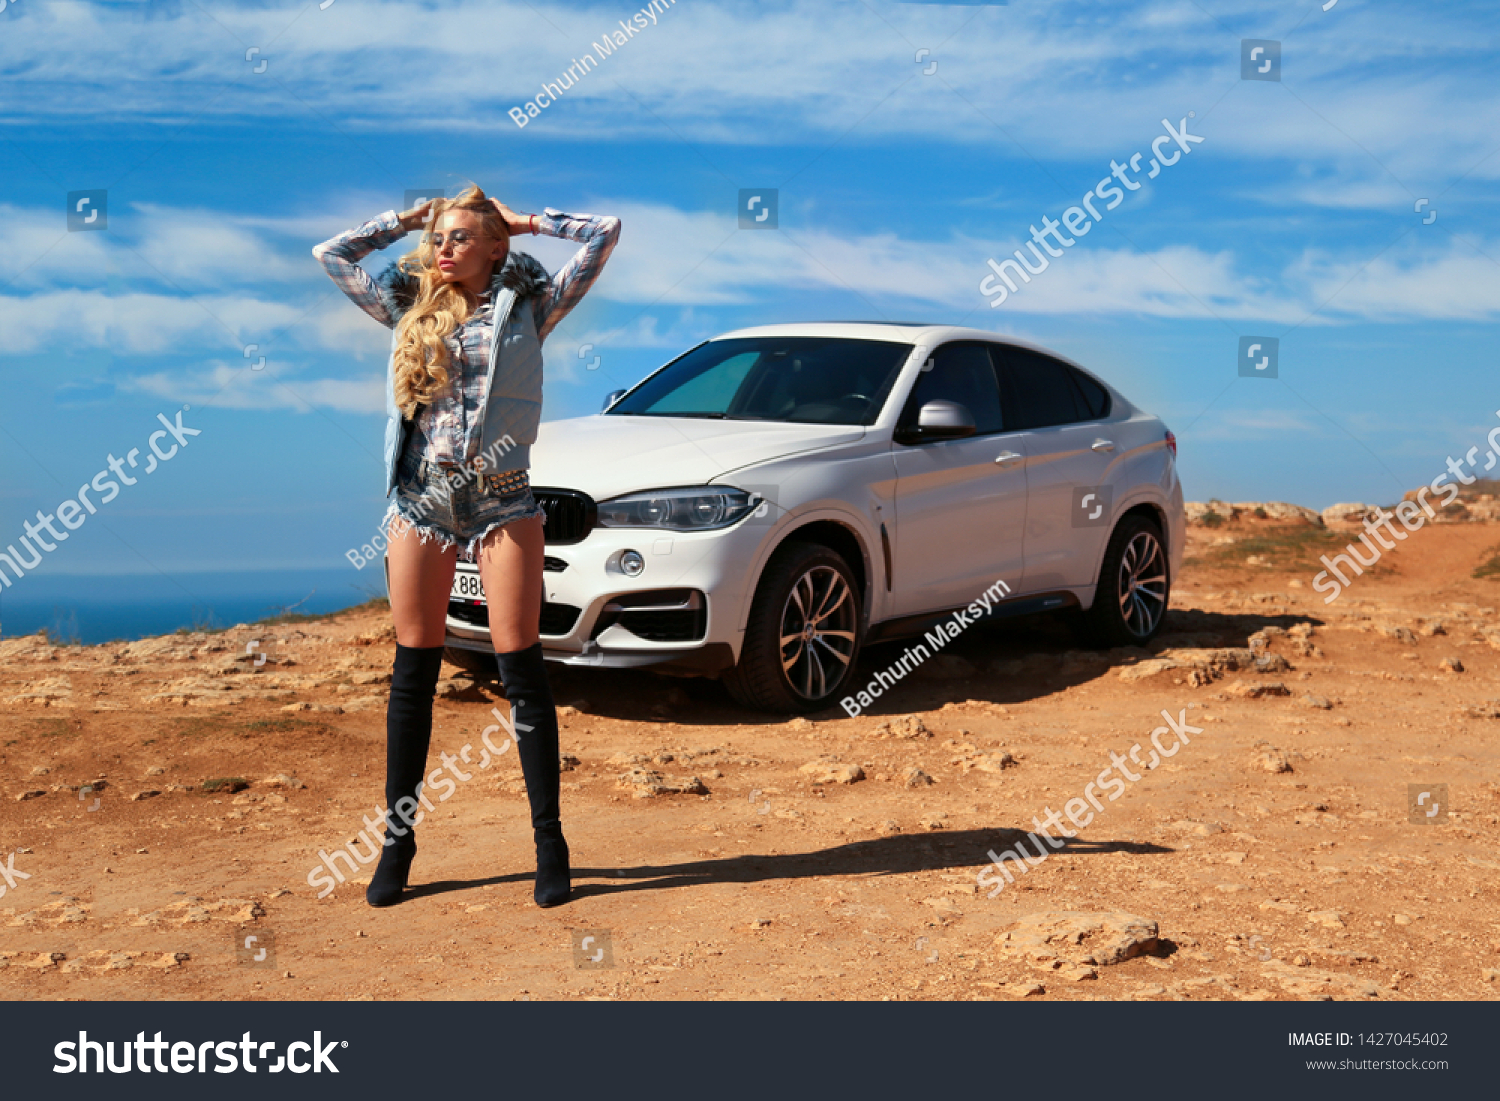 Bmw, sexually, car, sexy, woman, female, auto, automobile, girl, automobile, model, sexy, blonde, nature, fashion, style, relax, mood, emotions, travel, luxury, rich #1427045402